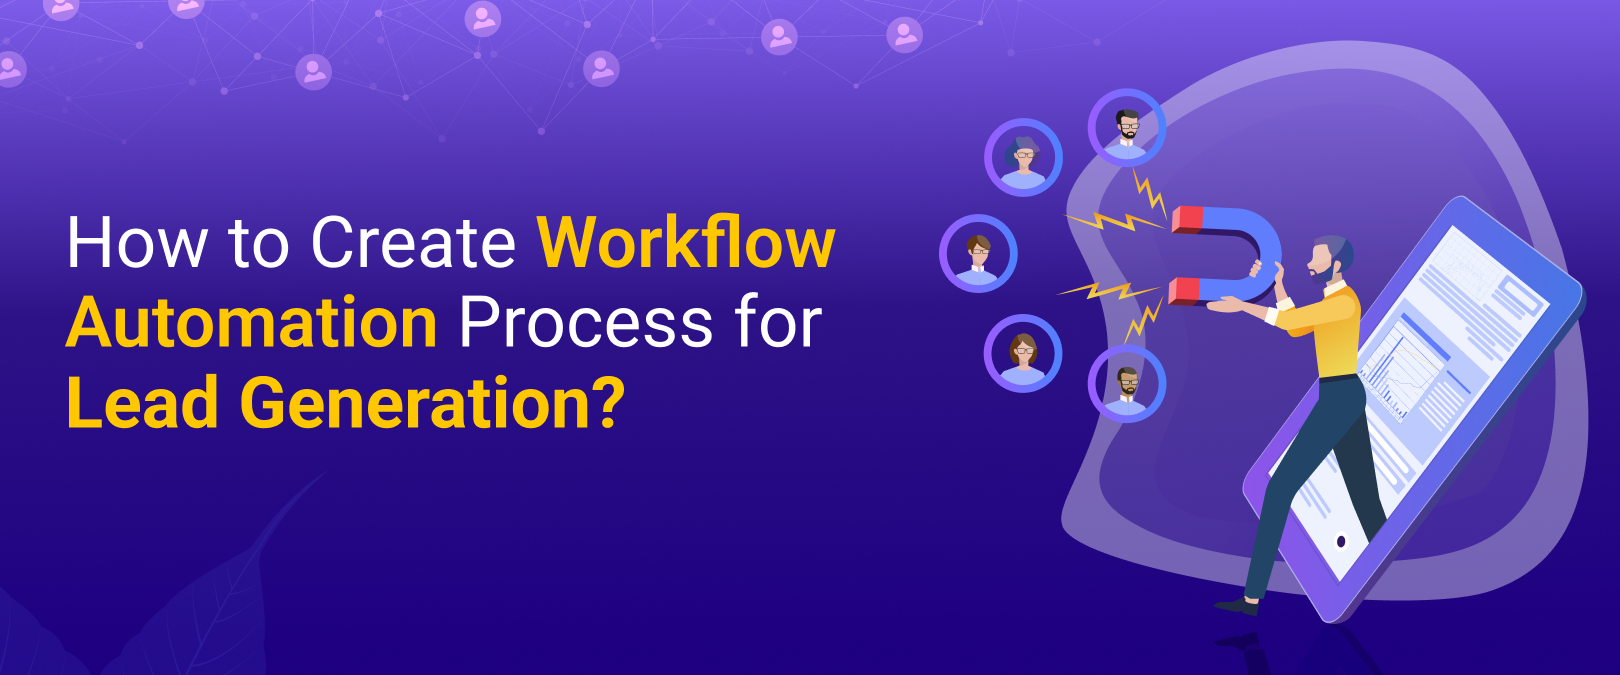 How to Create Workflow Automation Process for Lead Generation?